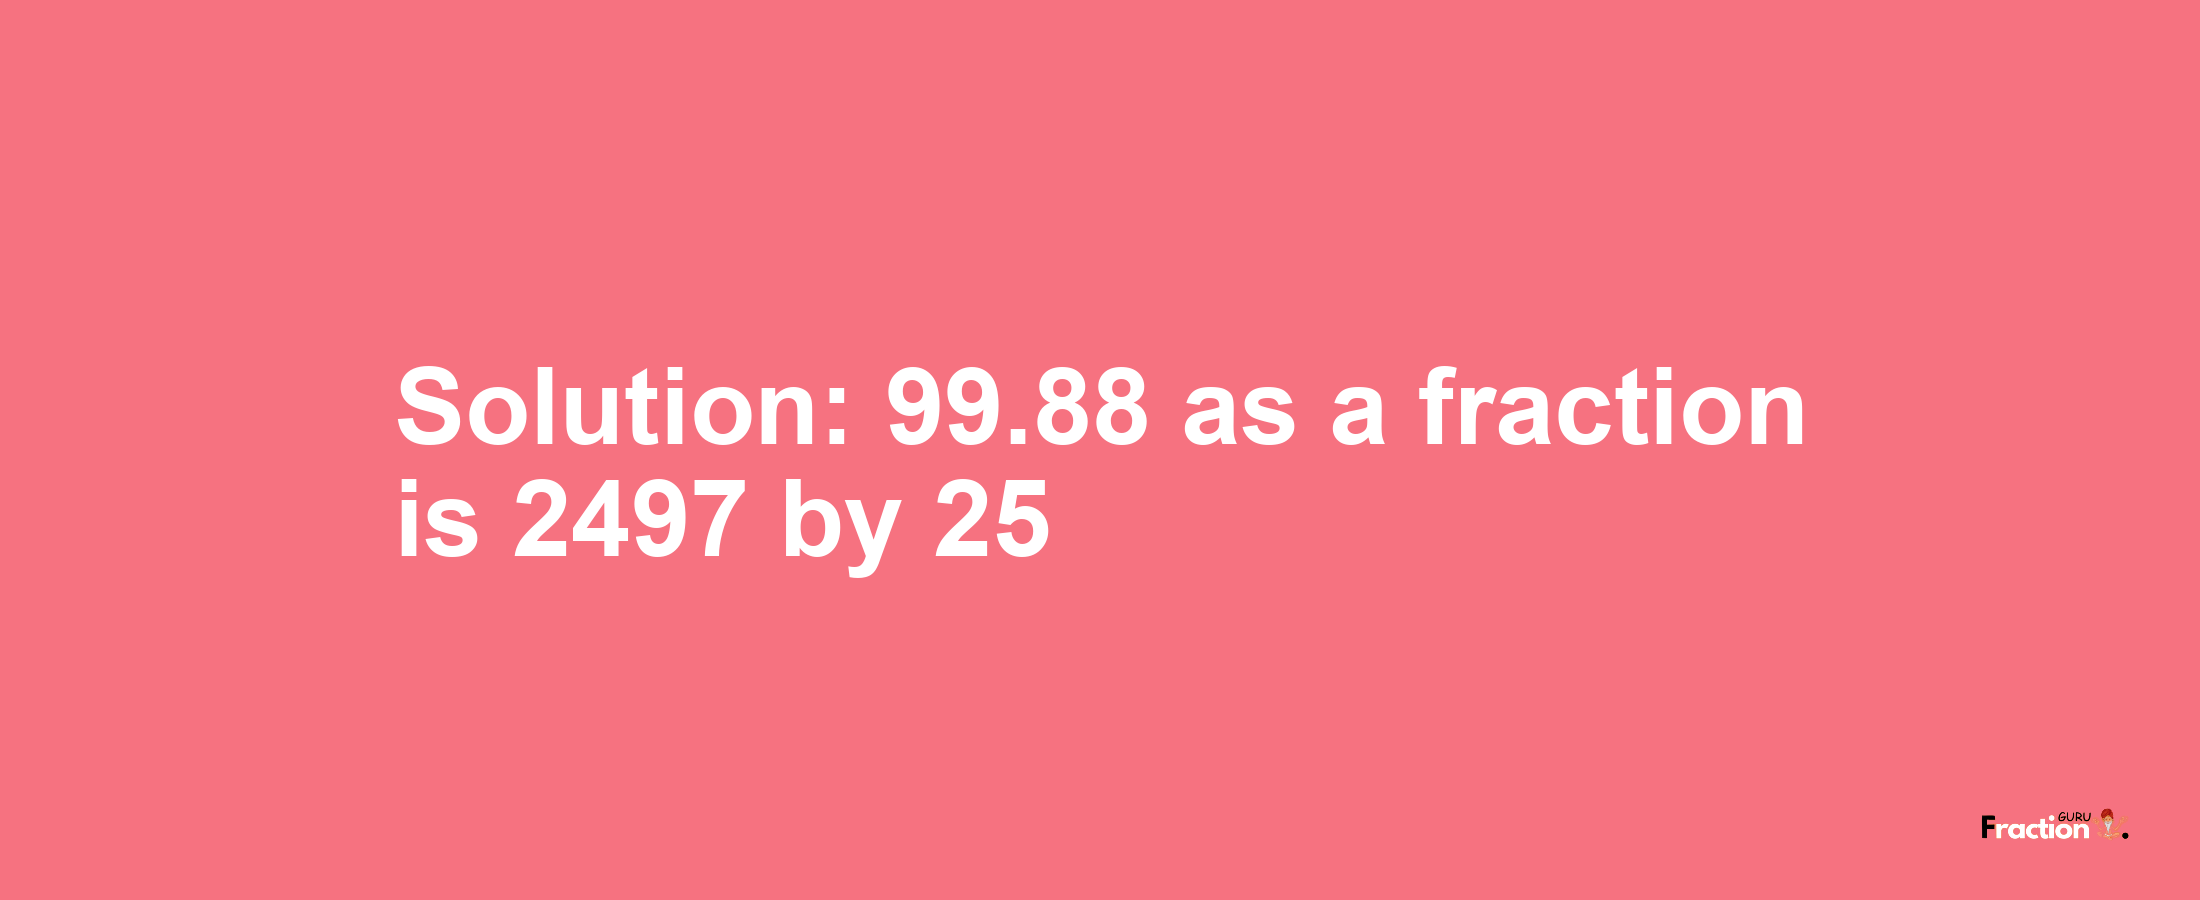 Solution:99.88 as a fraction is 2497/25